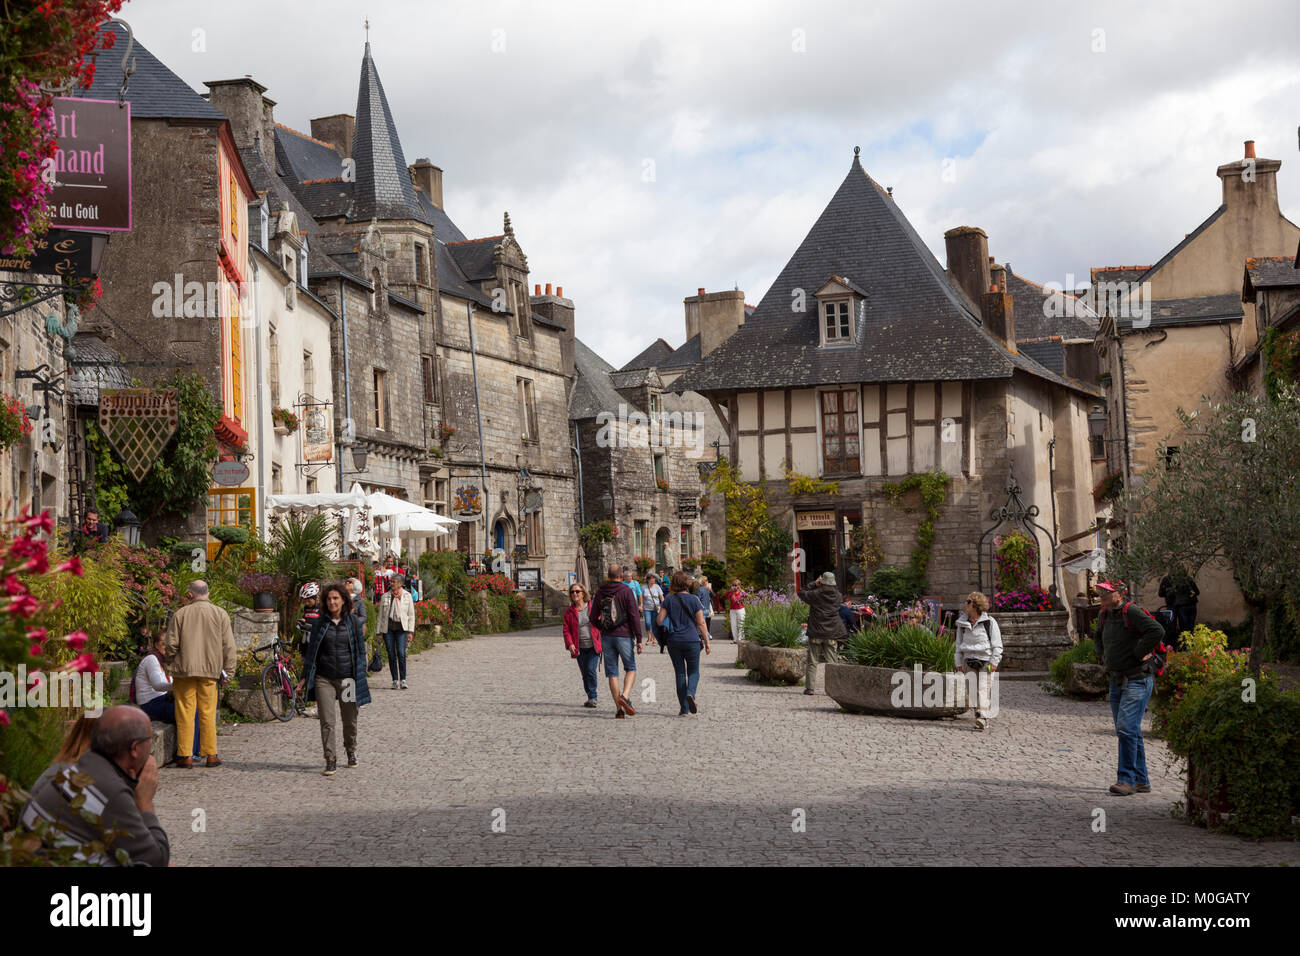 The square of the well, in Rochefort en Terre (Brittany - France). this lively place has been ranked as the 2016 France's most beautiful village. C Stock Photo